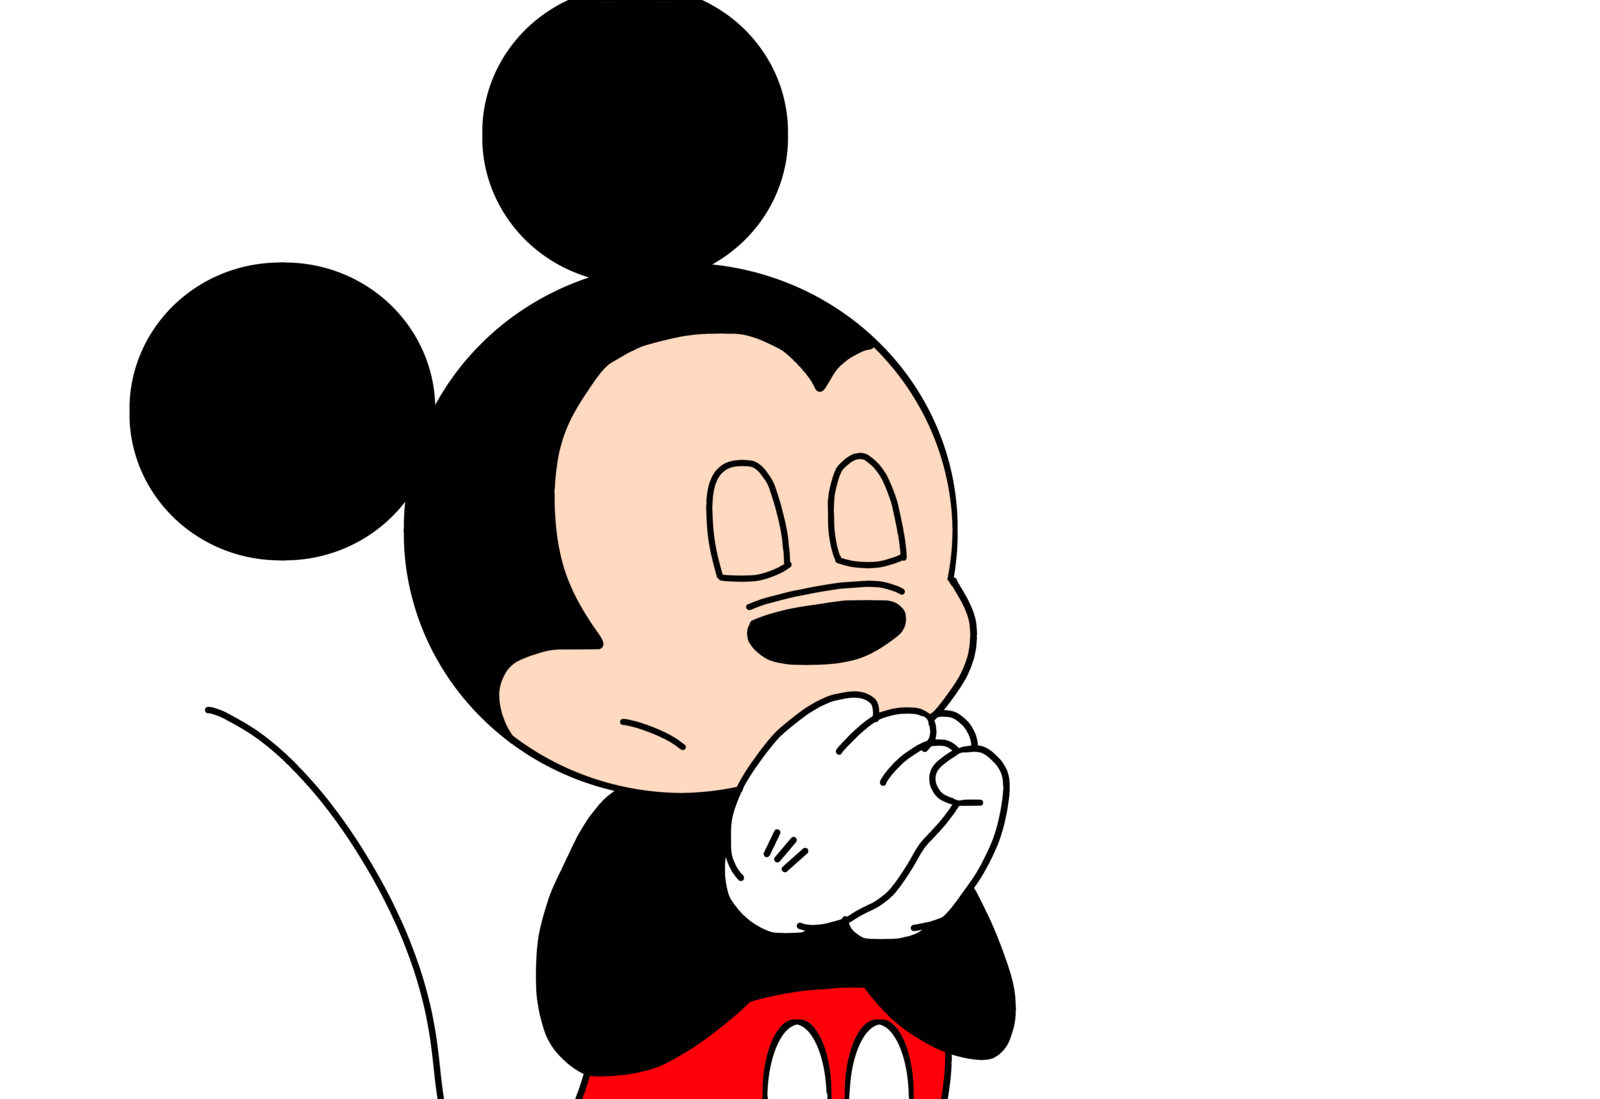 clipart stars mickey mouse